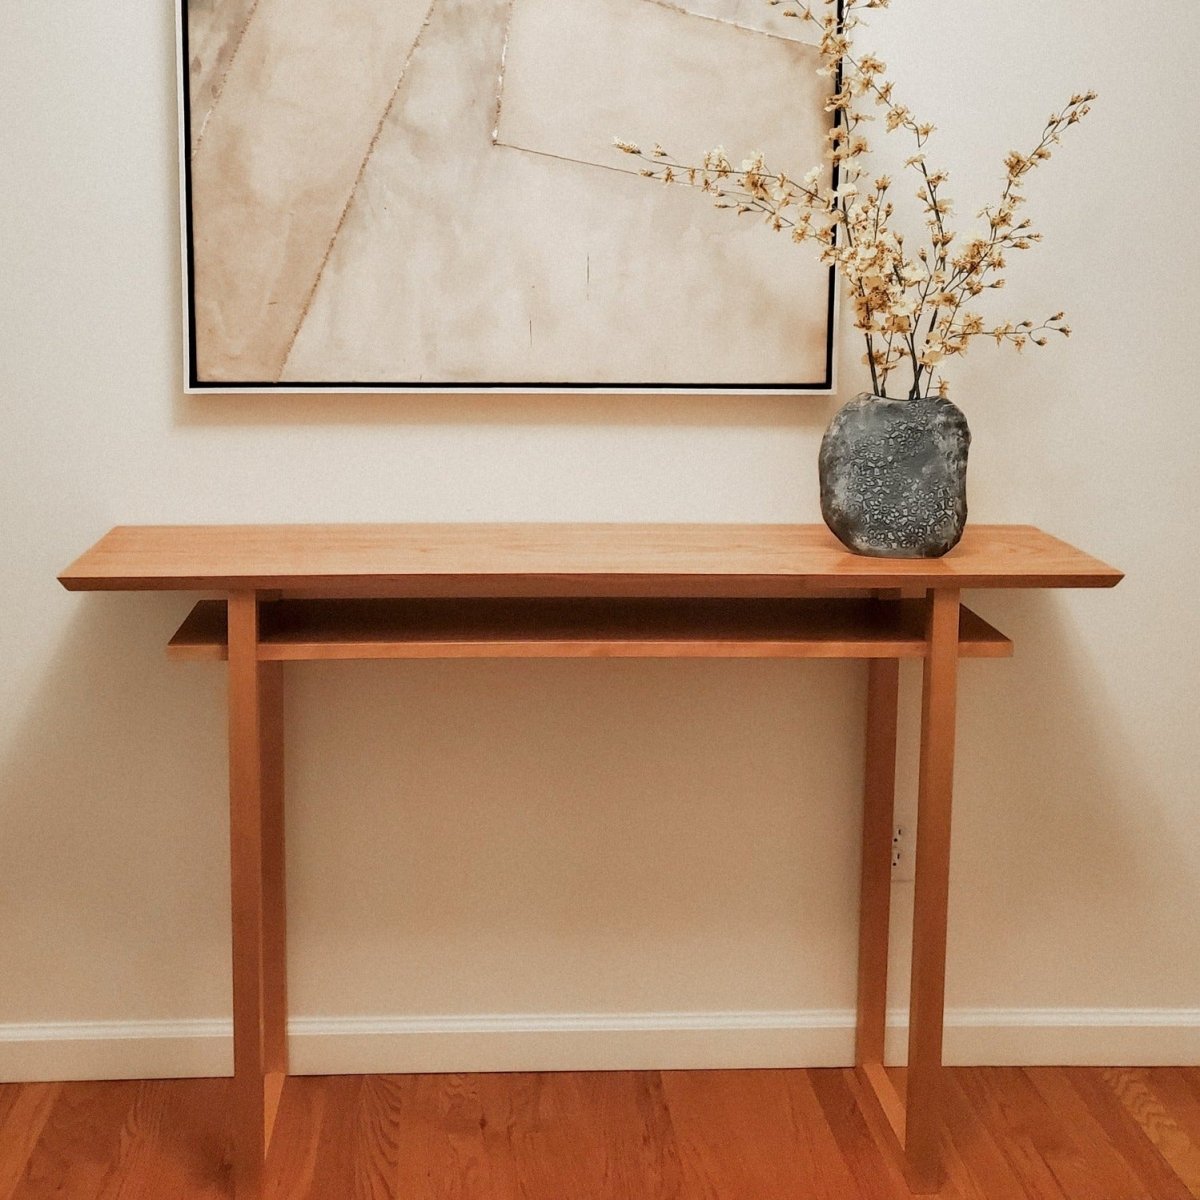 A contemporary cherry console table for entryways by Mokuzai Furniture.